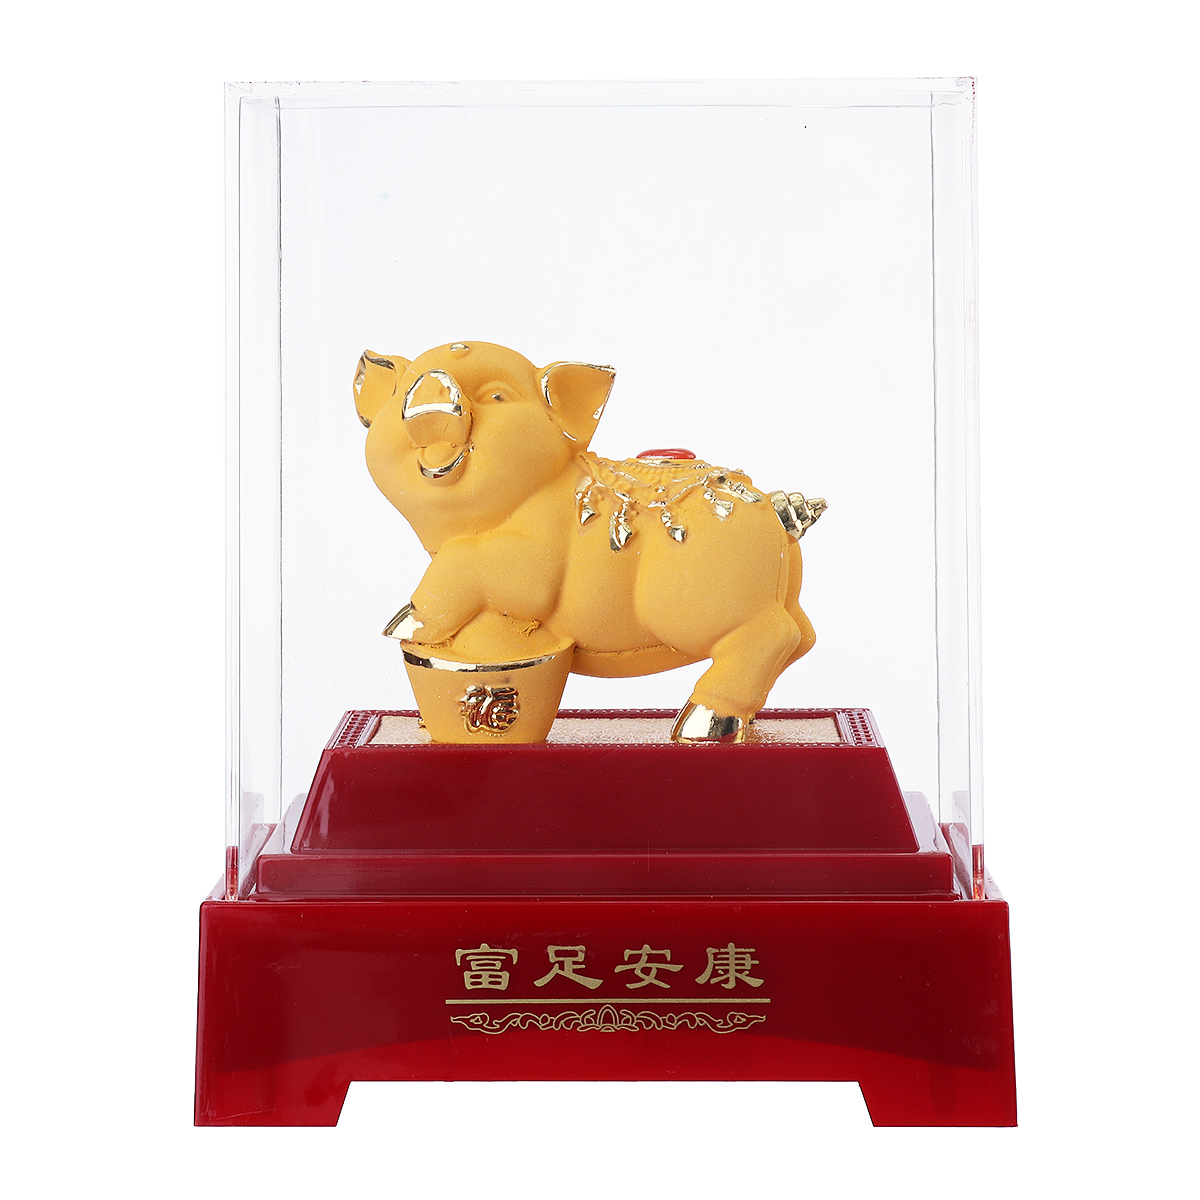 2019-Chinese-Zodiac-Gold-Pig-Money-Wealth-Statue-Office-Home-Decorations-Ornament-Gift-1515810-8